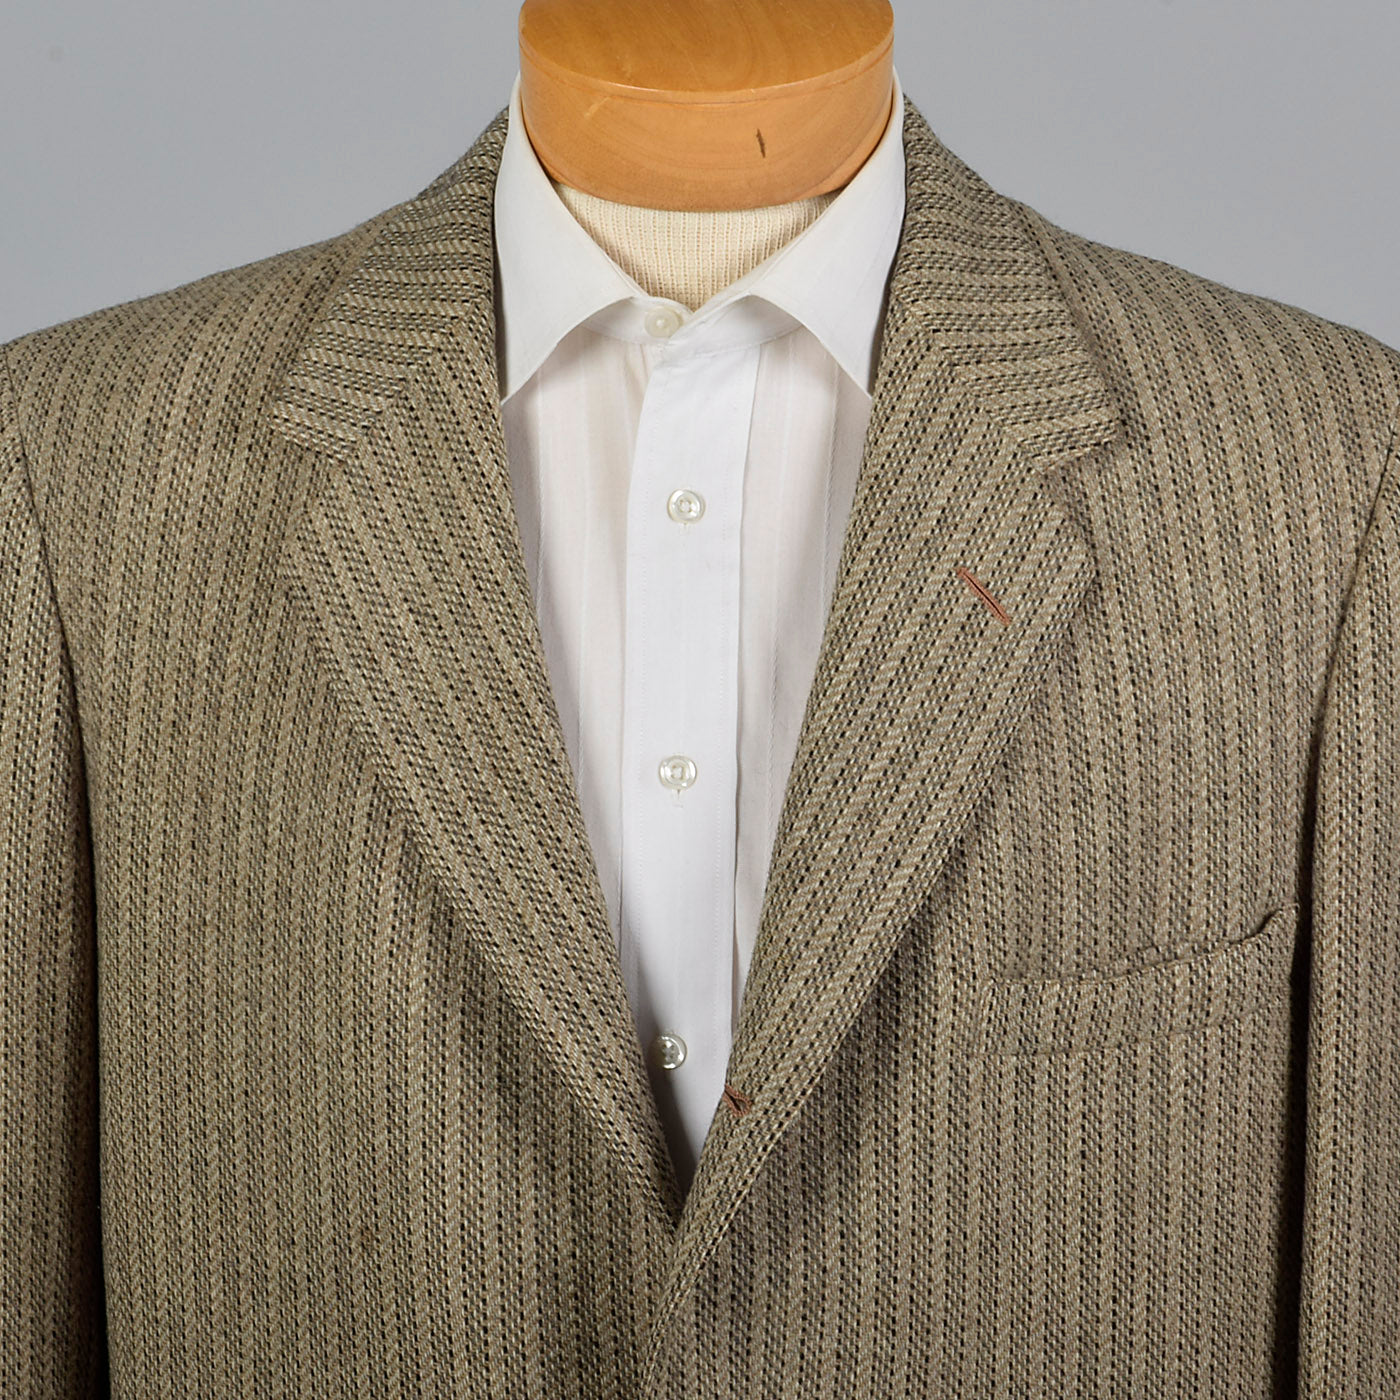 1950s Tan Tweed Stripe Jacket with Convertible Pockets